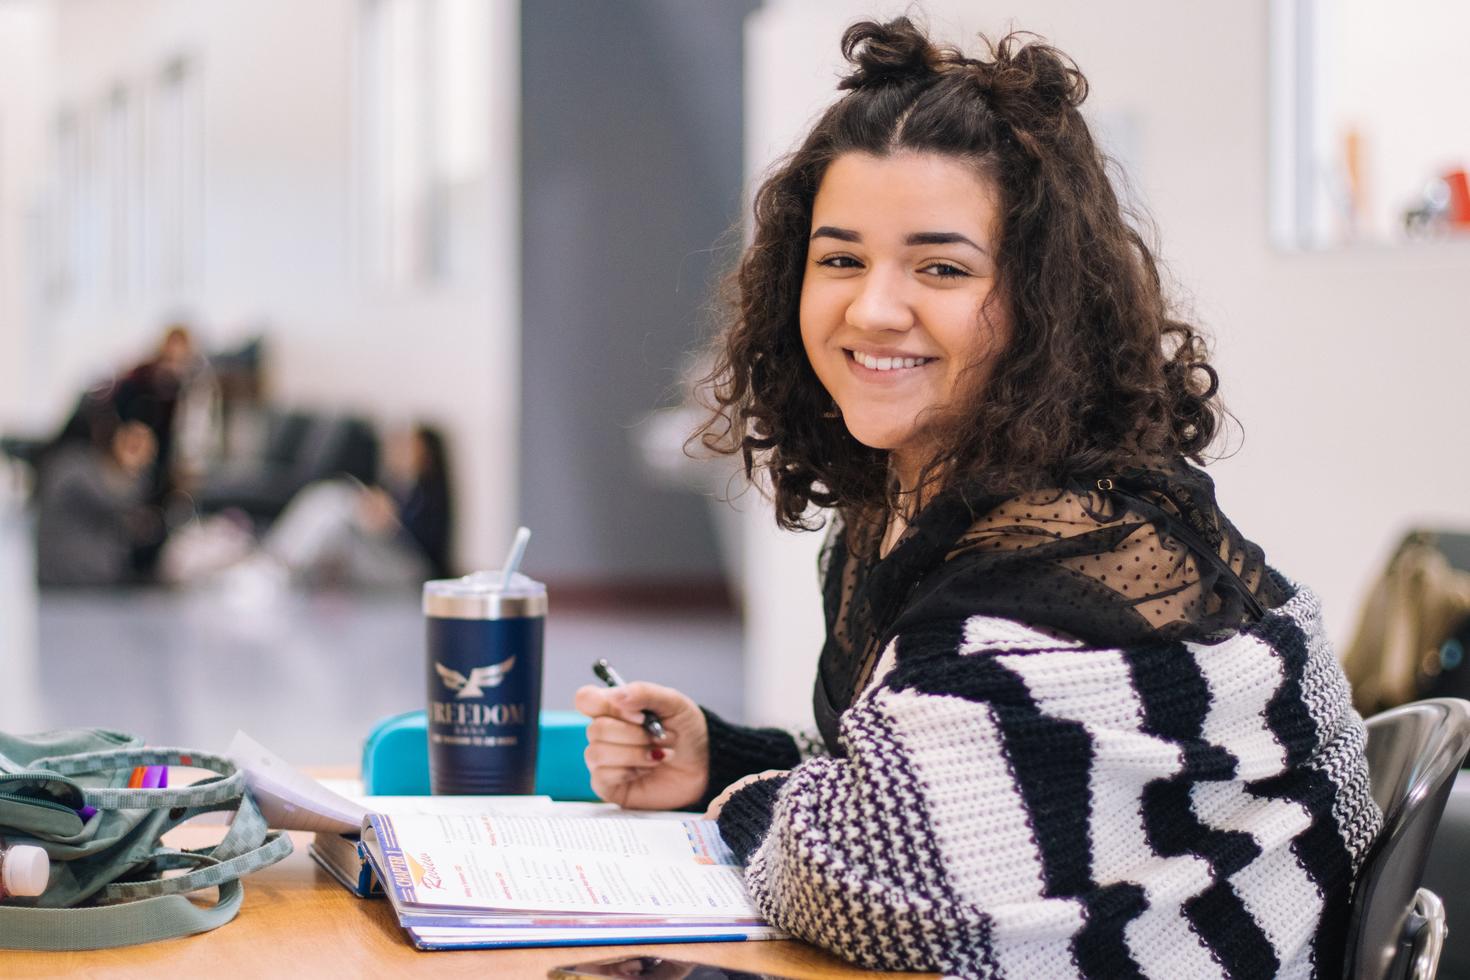 student looking at the camera and smiling while she is studying